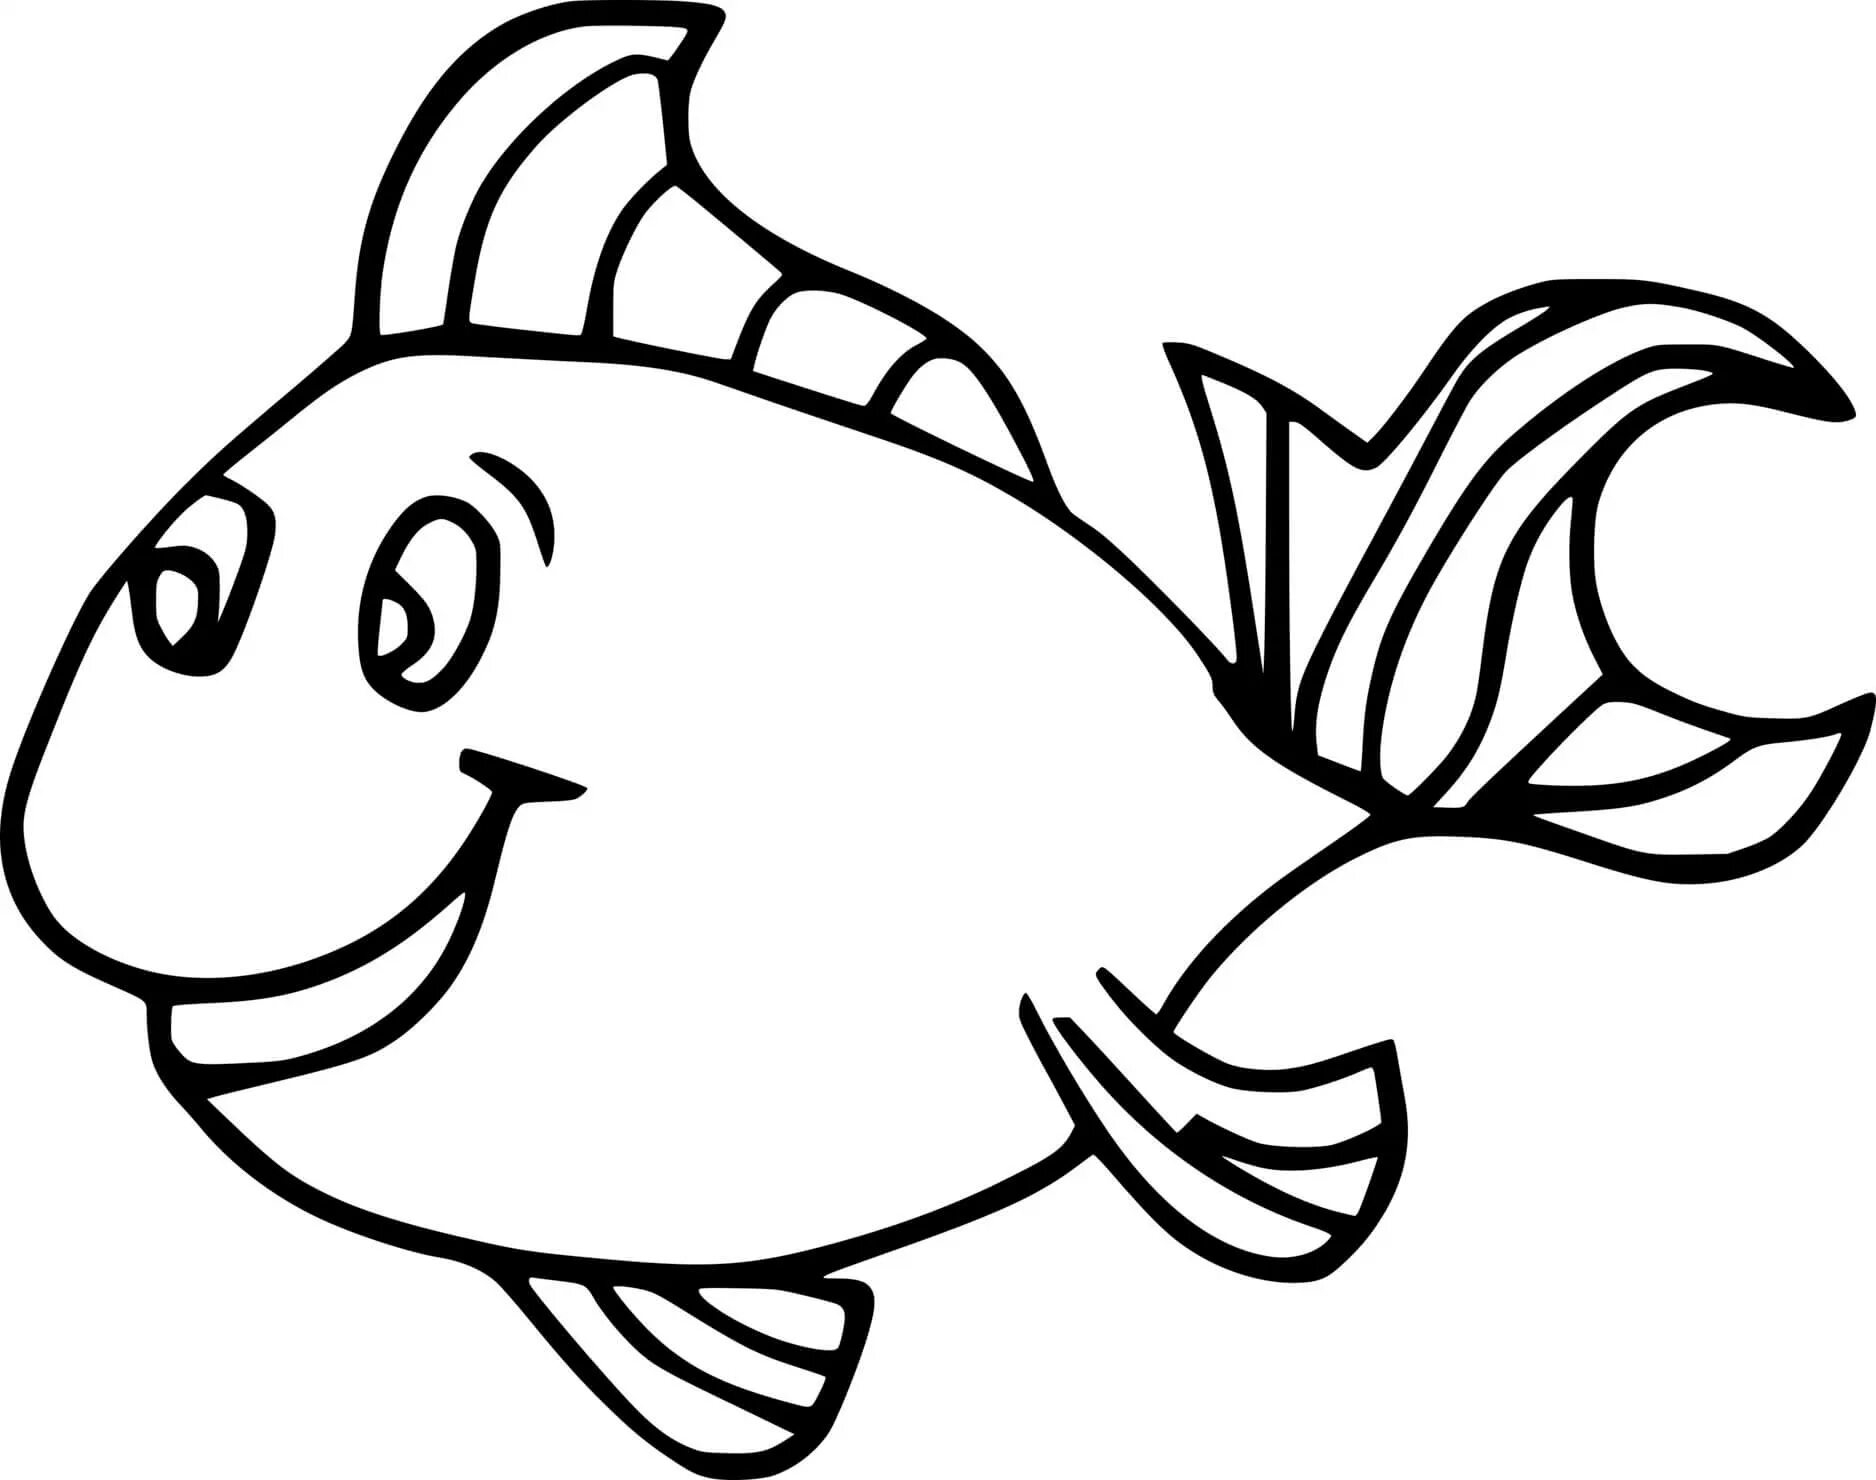 Brightly colored big fish coloring page